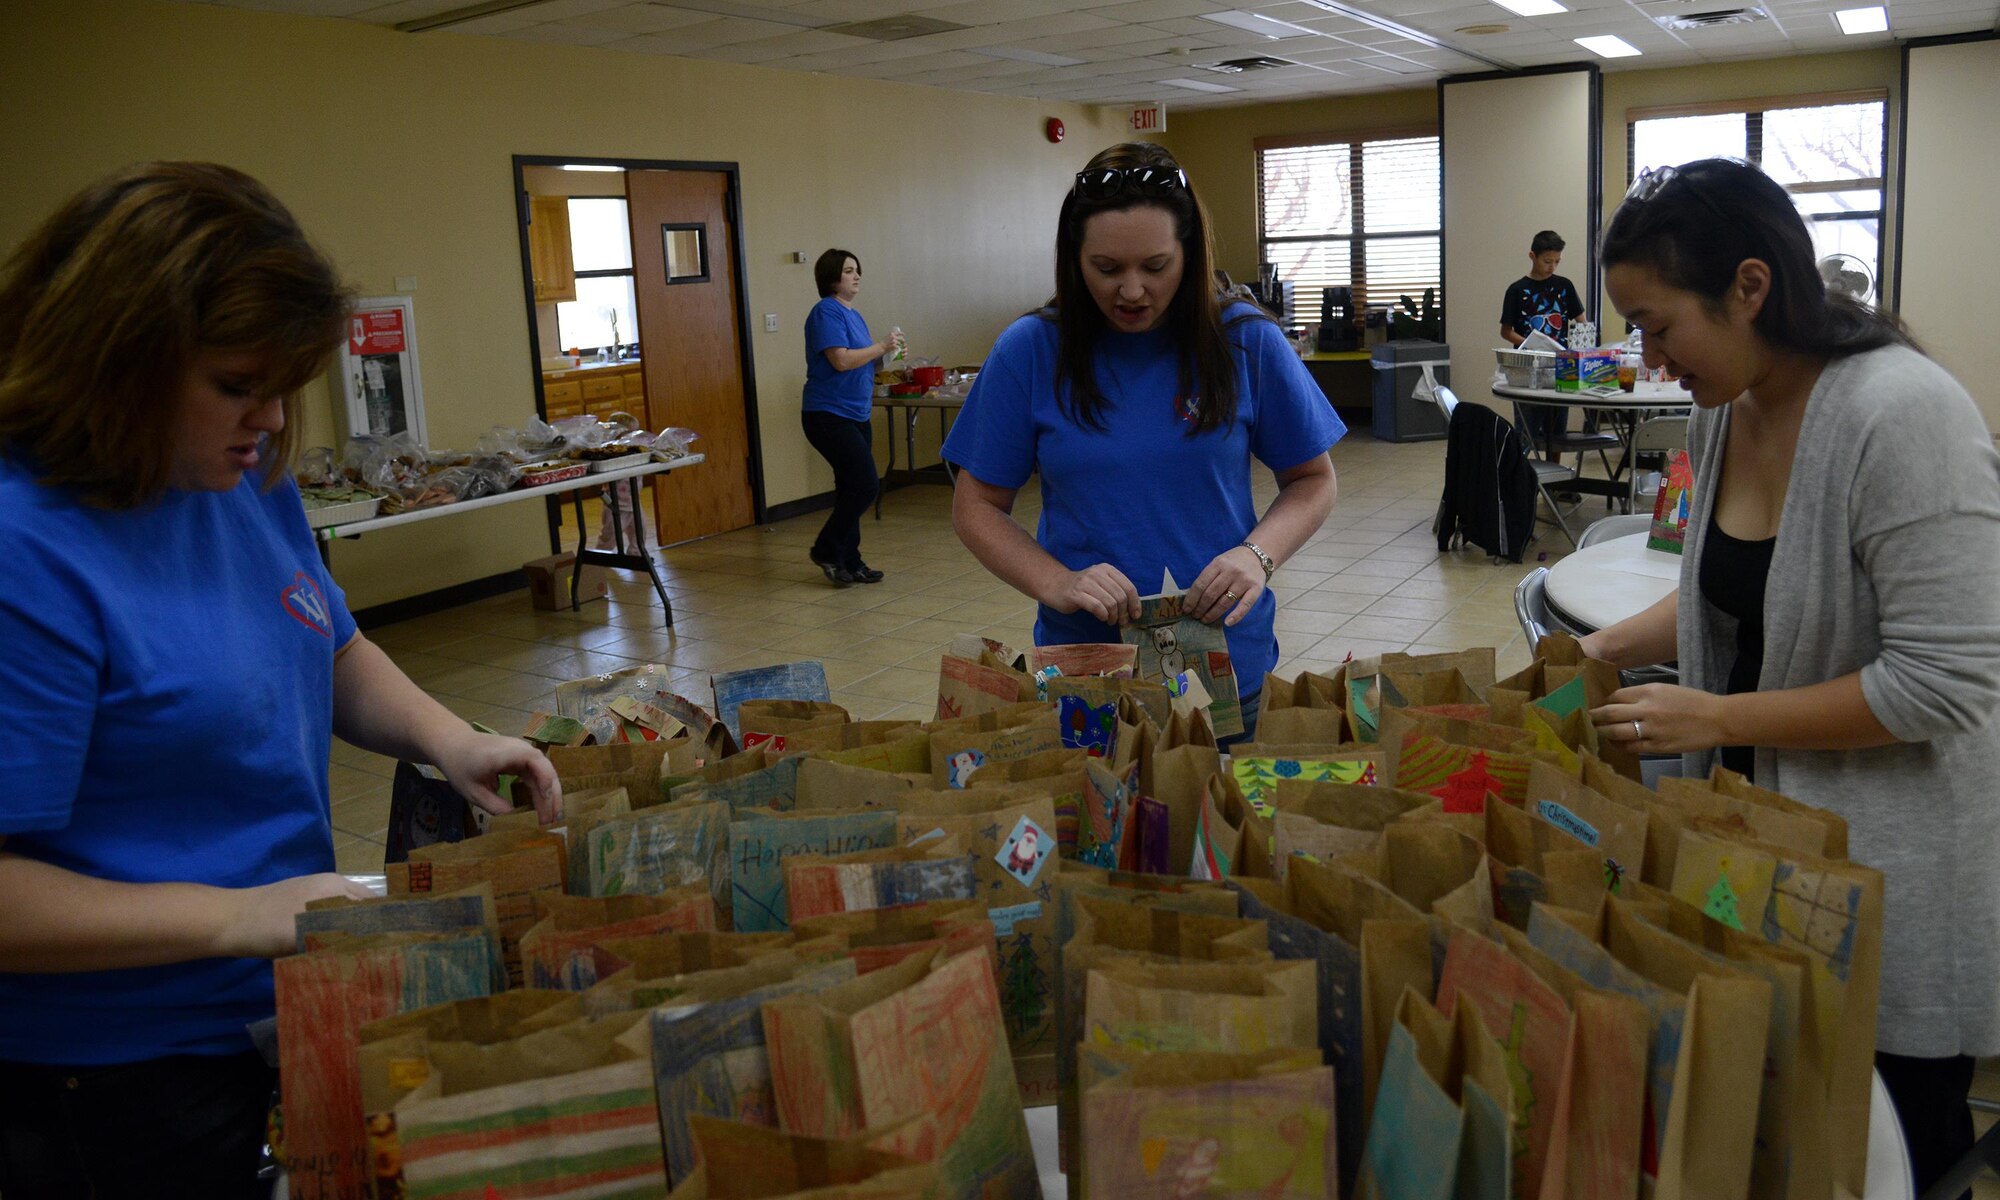 Laughlin spouses prepare cookie bags at the chapel on Laughlin Air Force Base, Texas, Dec. 10, 2015. About 400 dozen cookies were brought by spouses to bag and deliver to Laughlin’s single Airmen. (U.S. Air Force photo by Airman 1st Class Ariel D. Partlow)